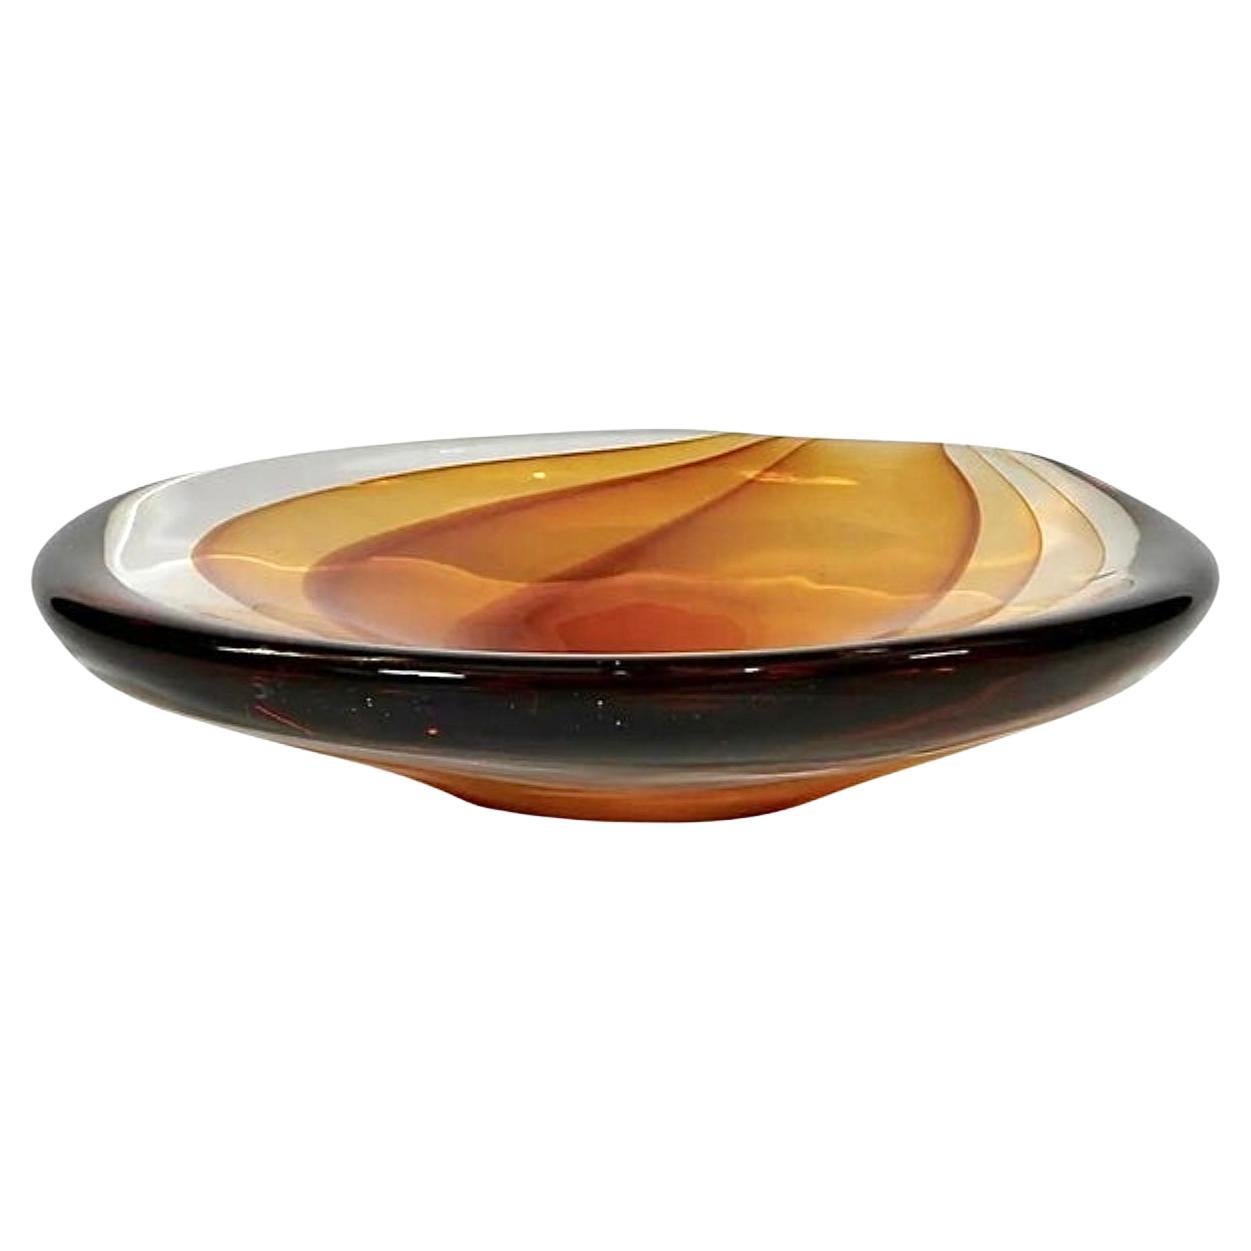 Antonio Da Ros for Cenedese Sommerso Murano Art glass bowl, Vide-Poche, ambers and clear. 
Antonio Da Ros (1936-2012) for Cenedese, Sommerso bowl, Murano, Italy
Signed (etched) 'Cenedese' 
Measures: 11 1/8